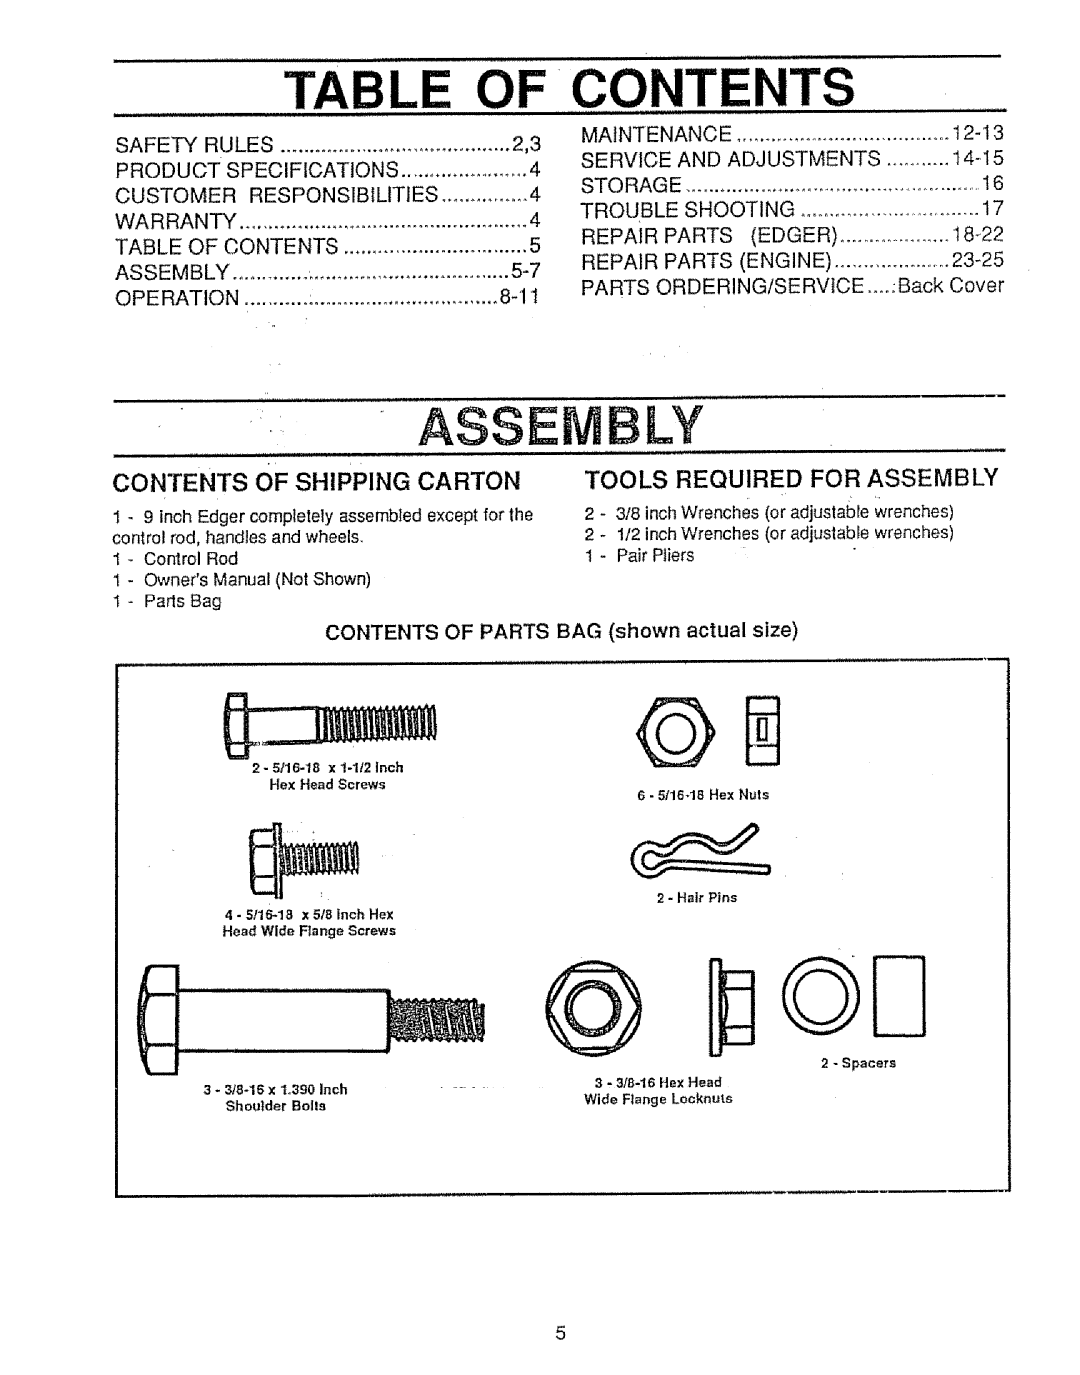 Sears 536.79751 owner manual Con Ents, Contents Of Shipping Carton, Tools Required For Assembly 